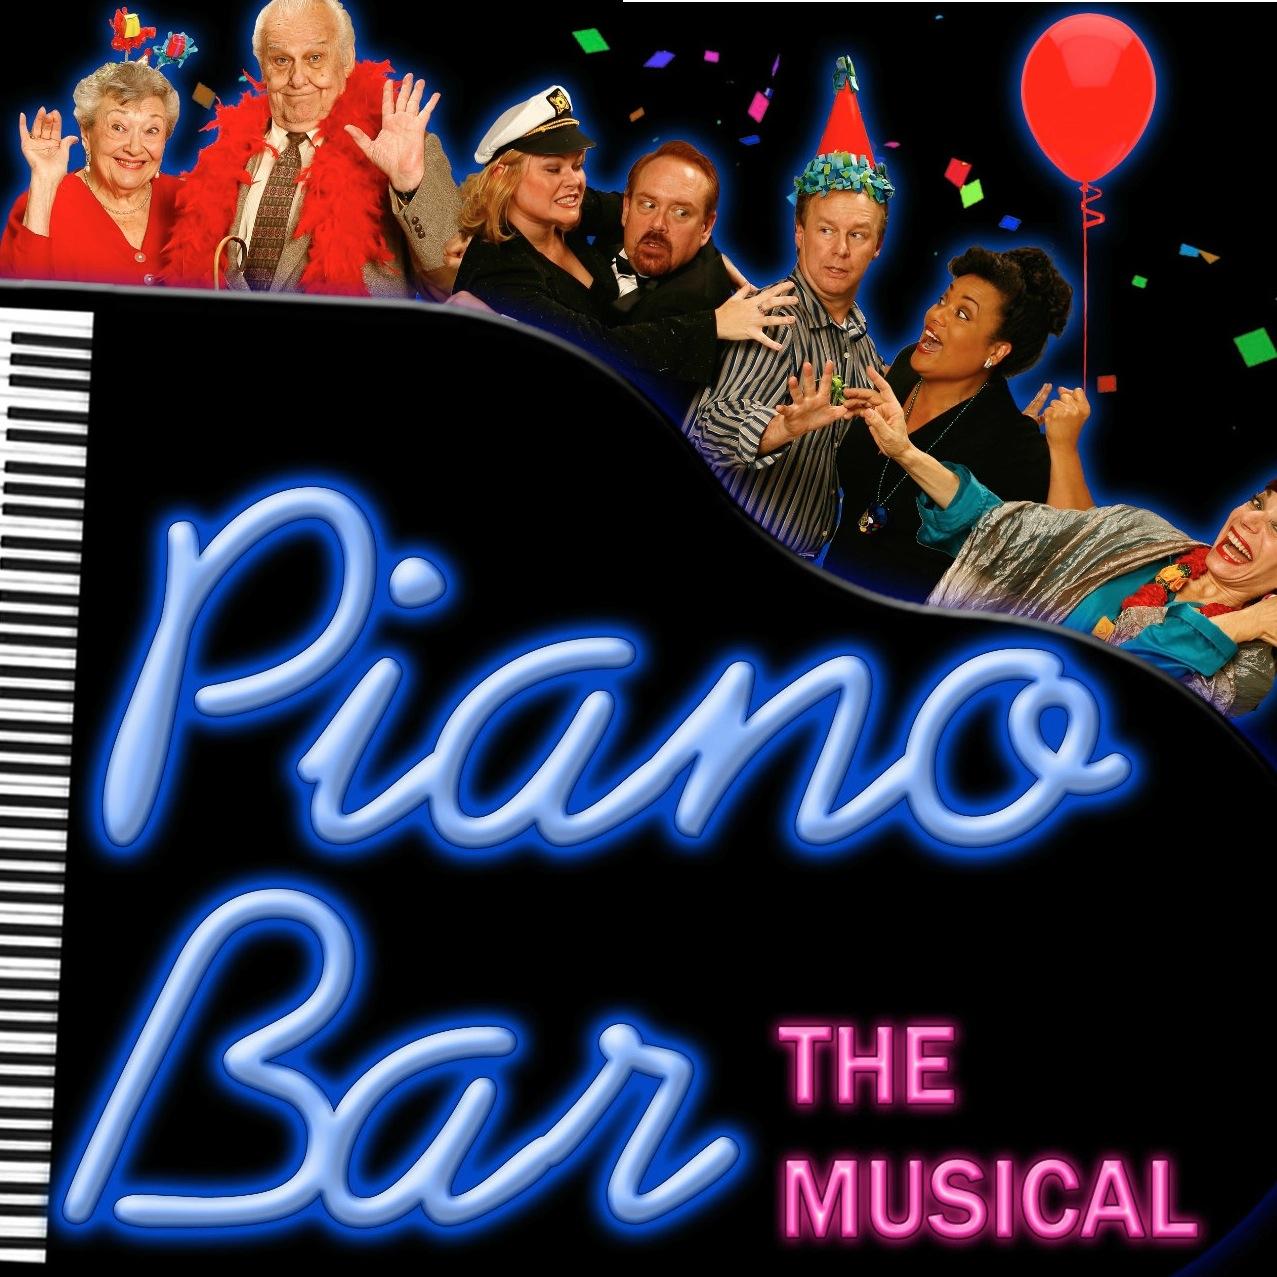 Laugh-out-loud musical about the closing night party at Floyd's Piano Bar Returns—audiences play along with cocktails, songs, games, and comedy